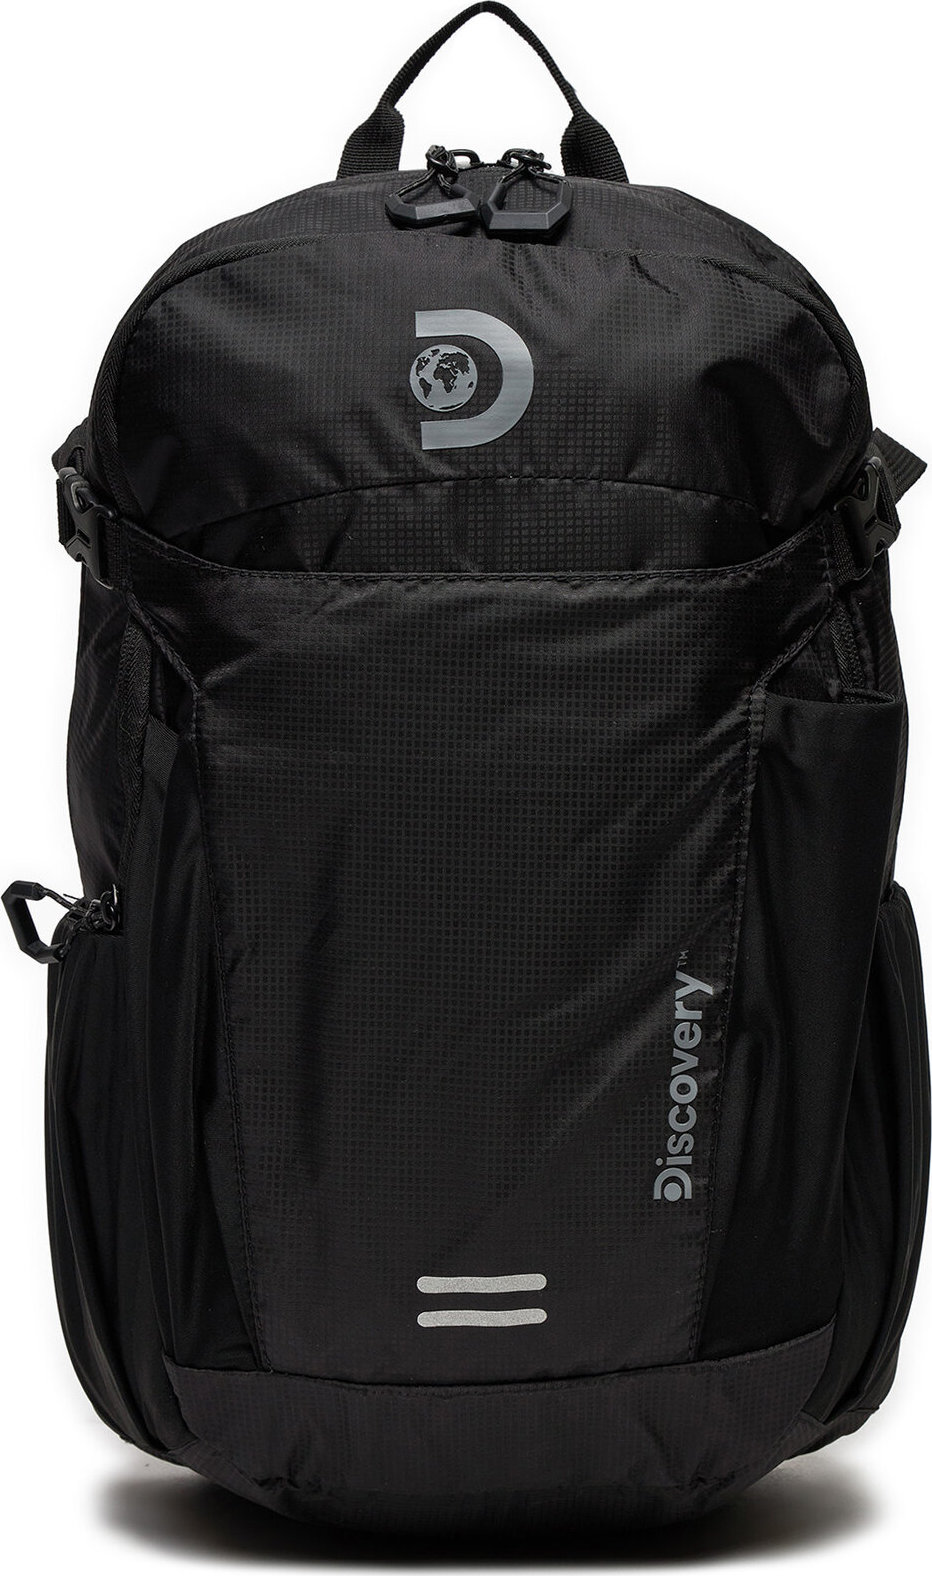 Batoh Discovery Outdoor Backpack D01113.06 Black